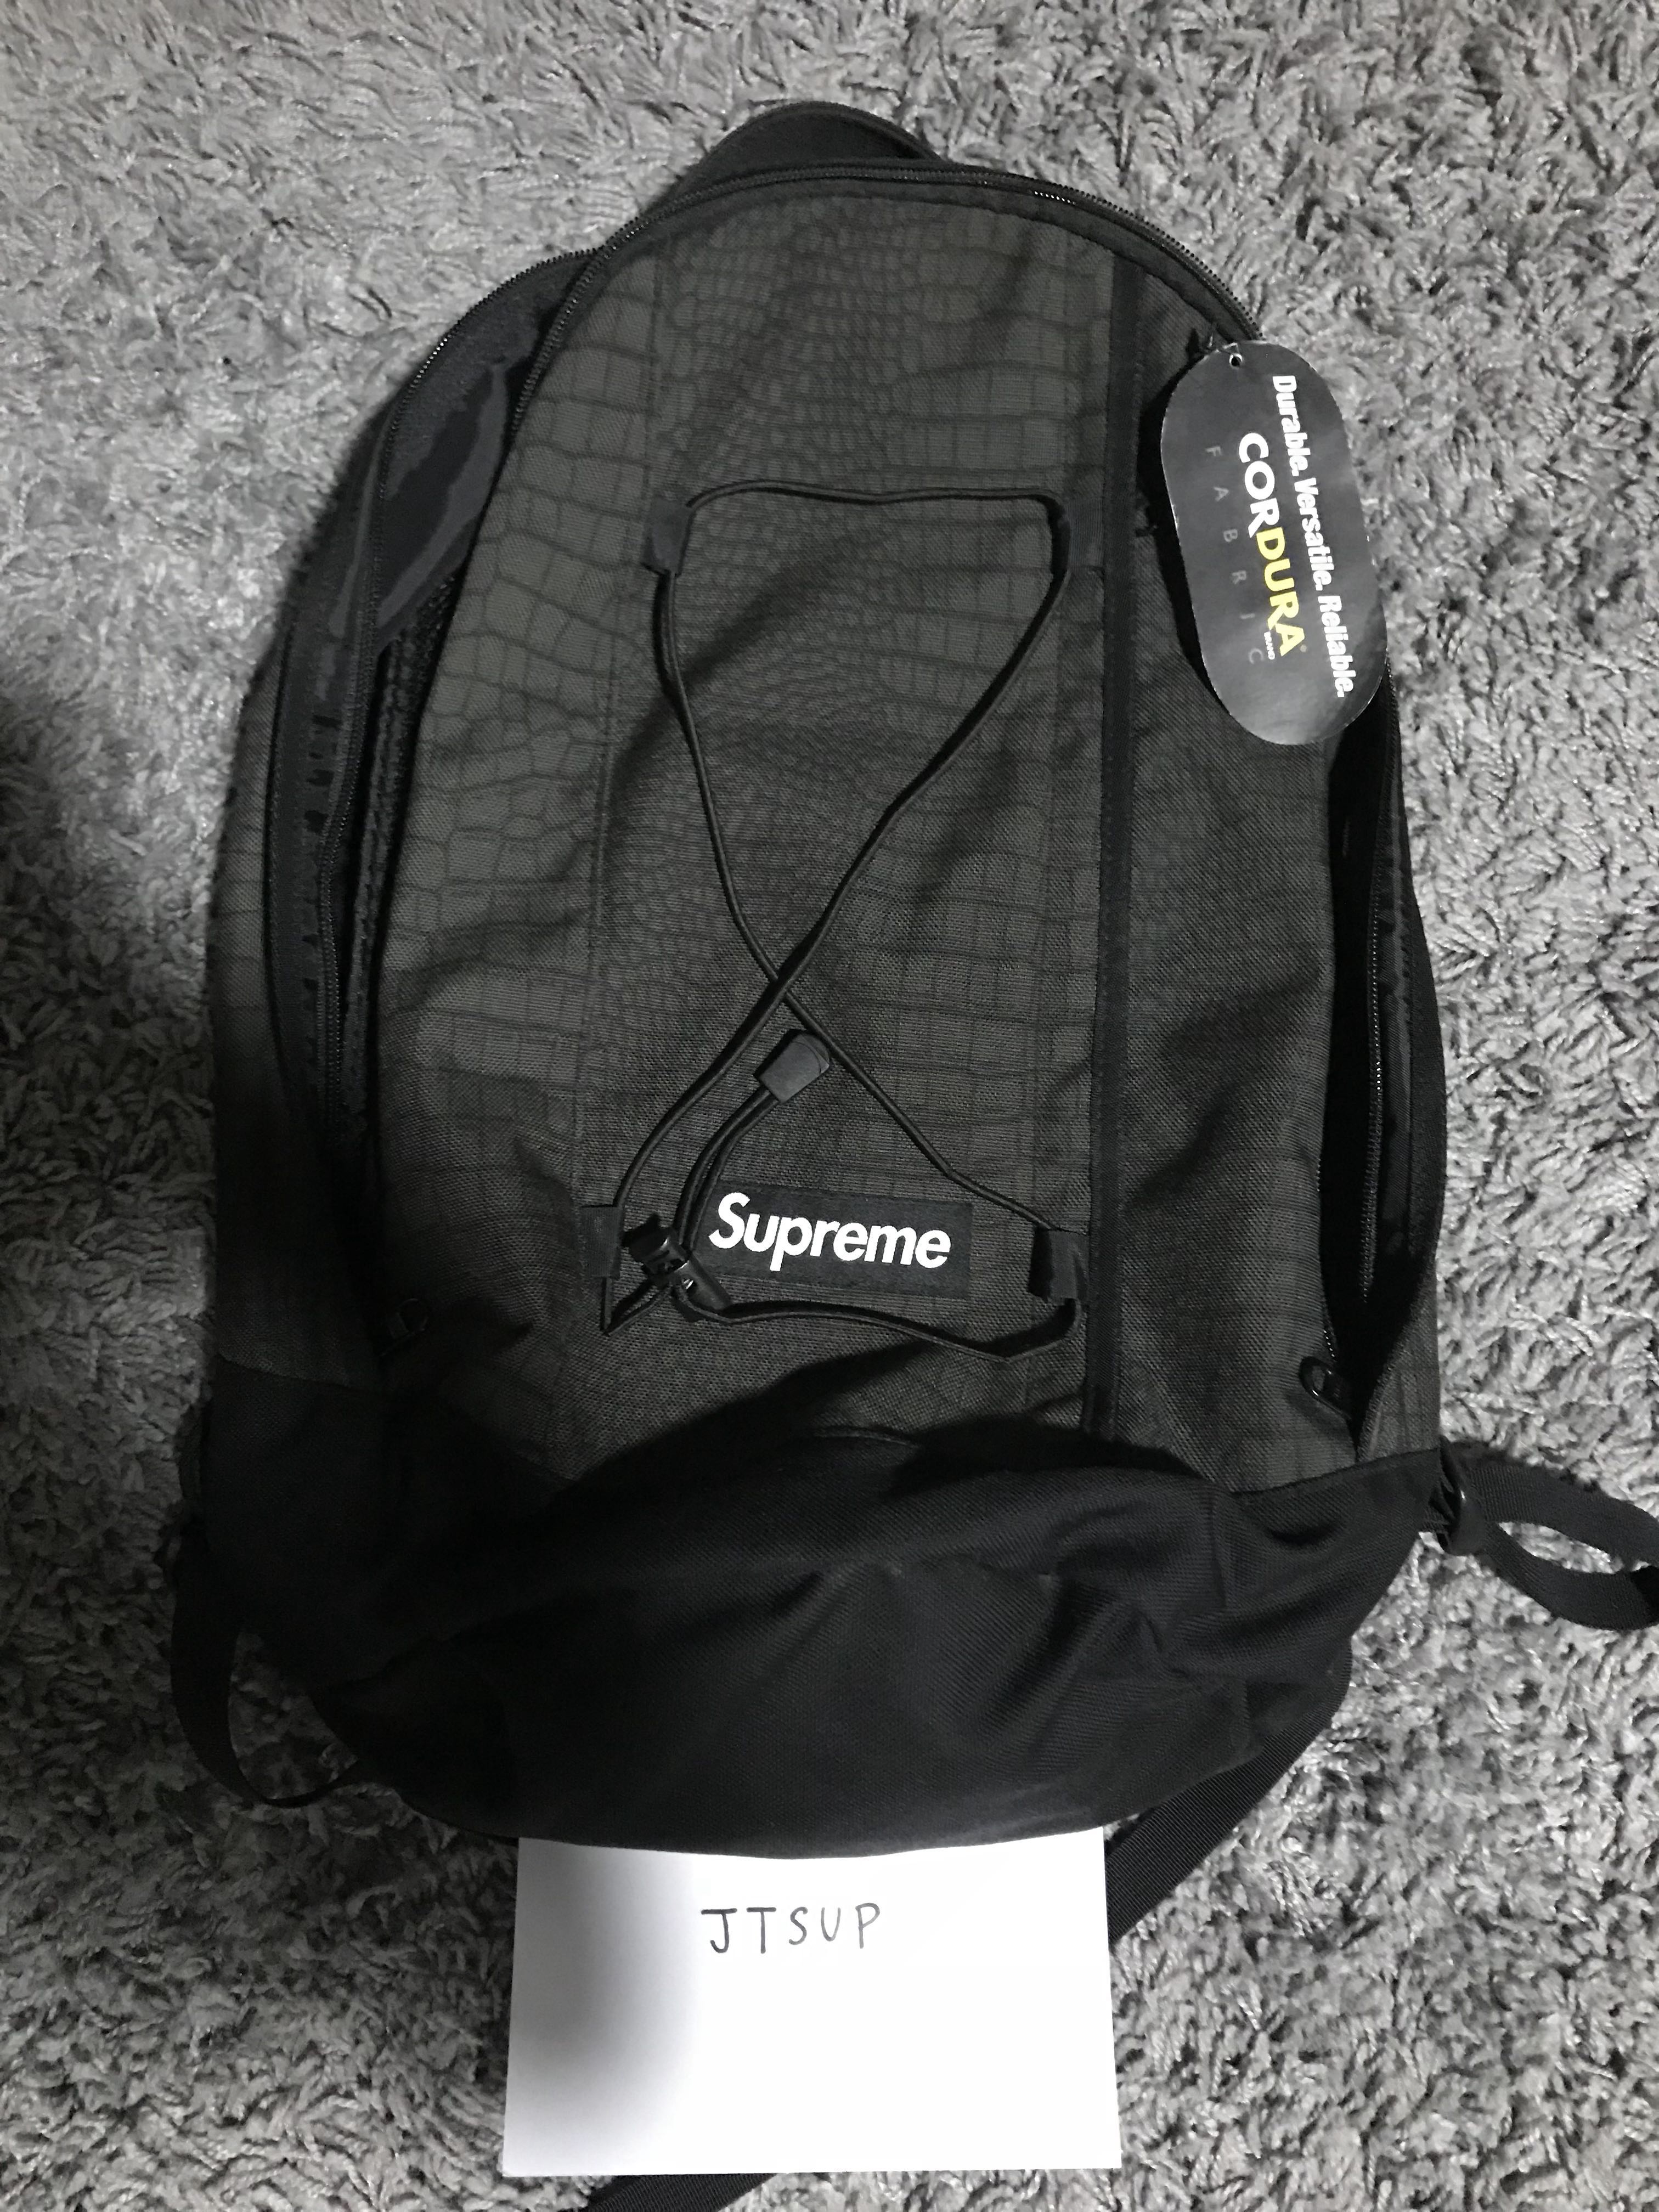 DSWT Supreme croc backpack ss13, Men's Fashion, Bags, Sling Bags